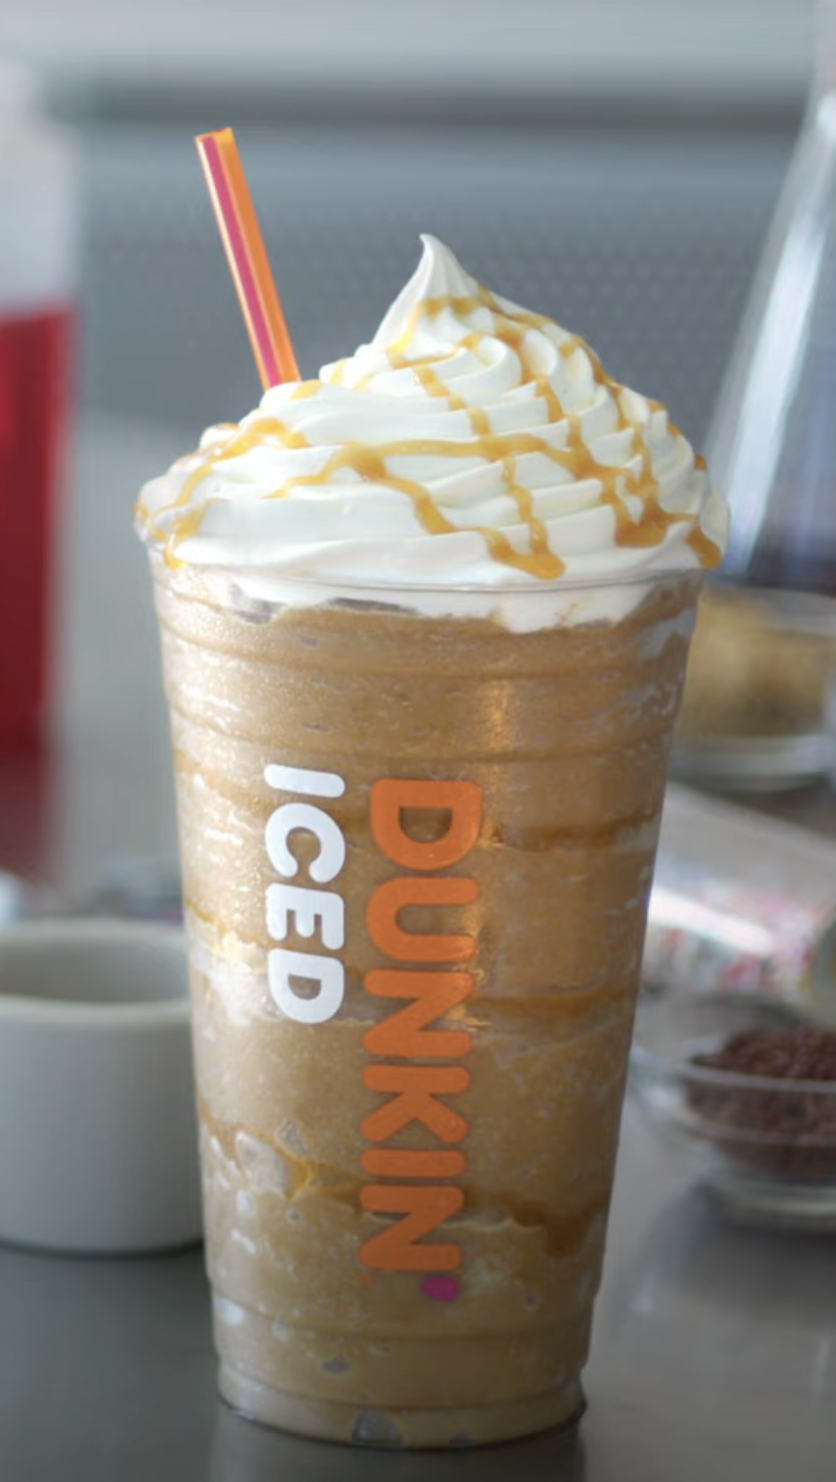 A close-up of the new drink, which has whipped cream on top